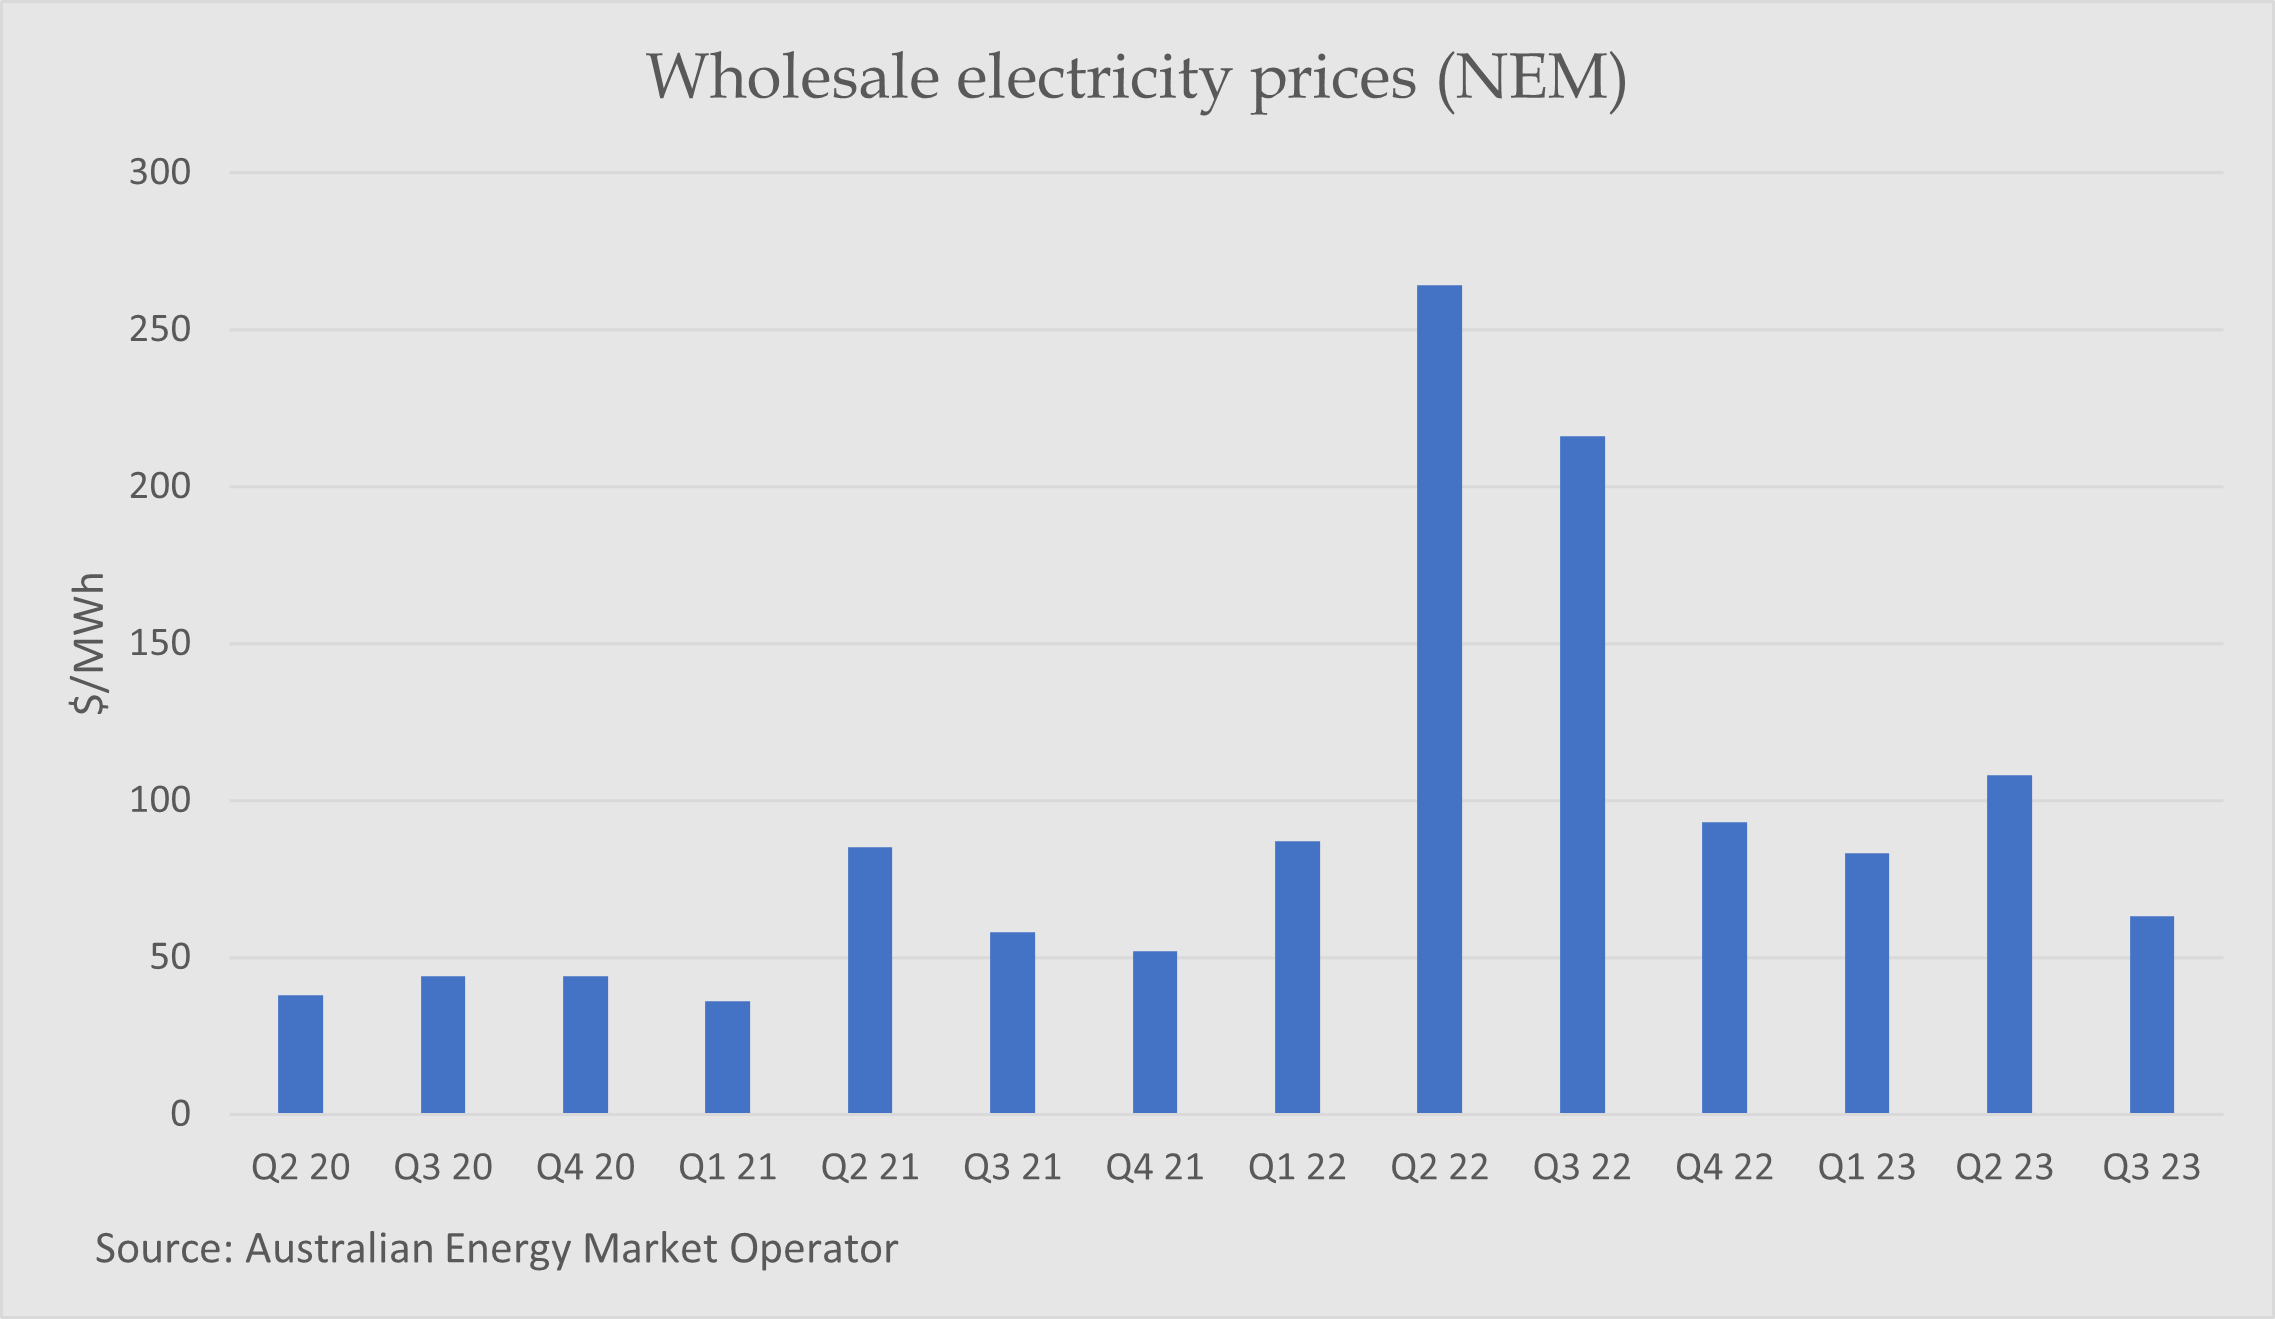 Bar graph showing how wholesale power prices spiked in 2022 before falling steadily since